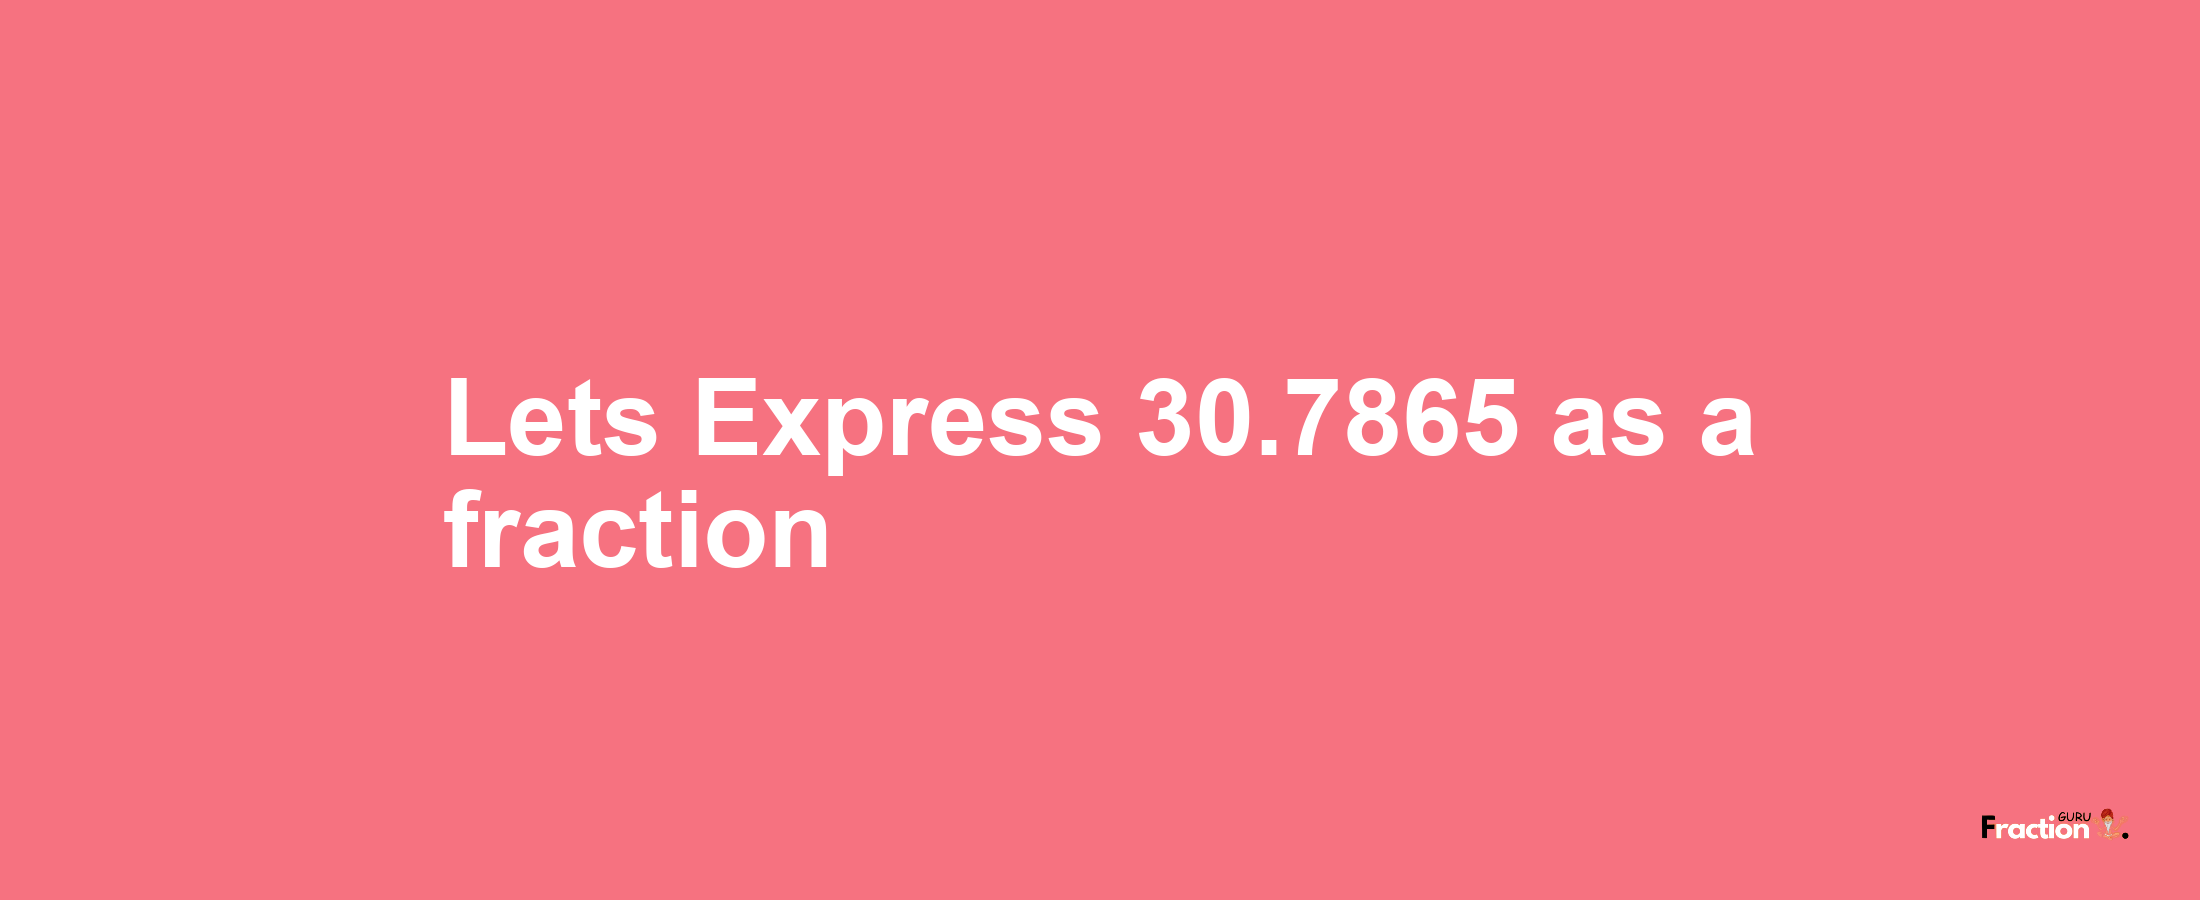 Lets Express 30.7865 as afraction